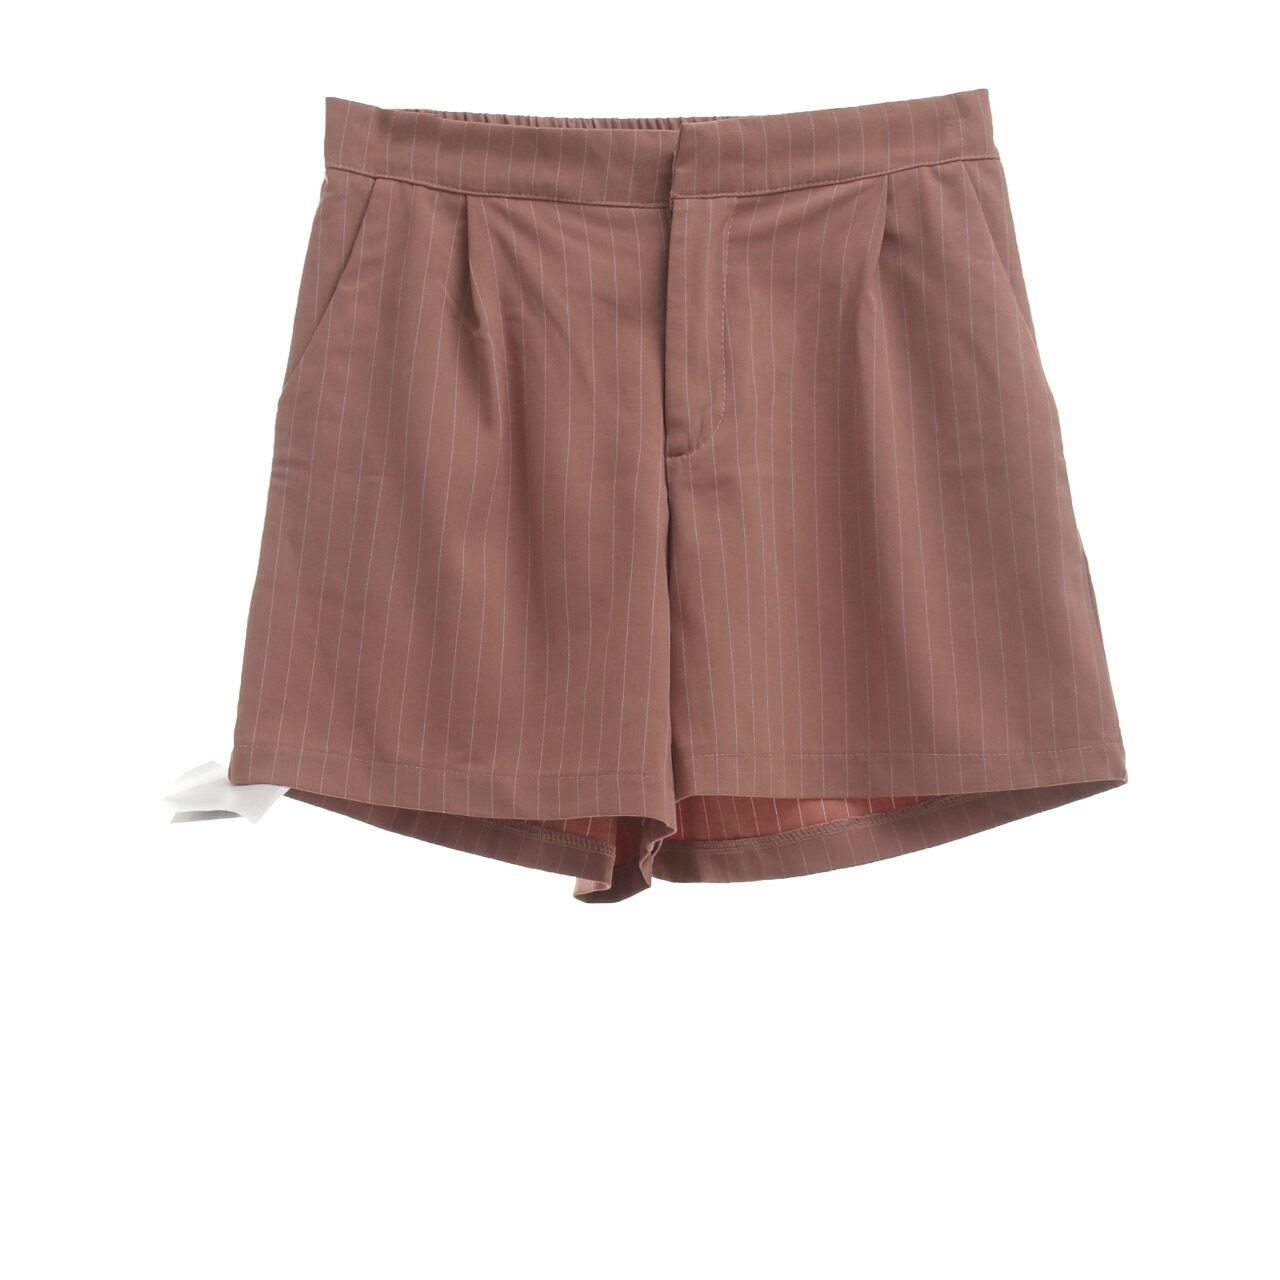 This is April Dusty Pink Striped Short Pants